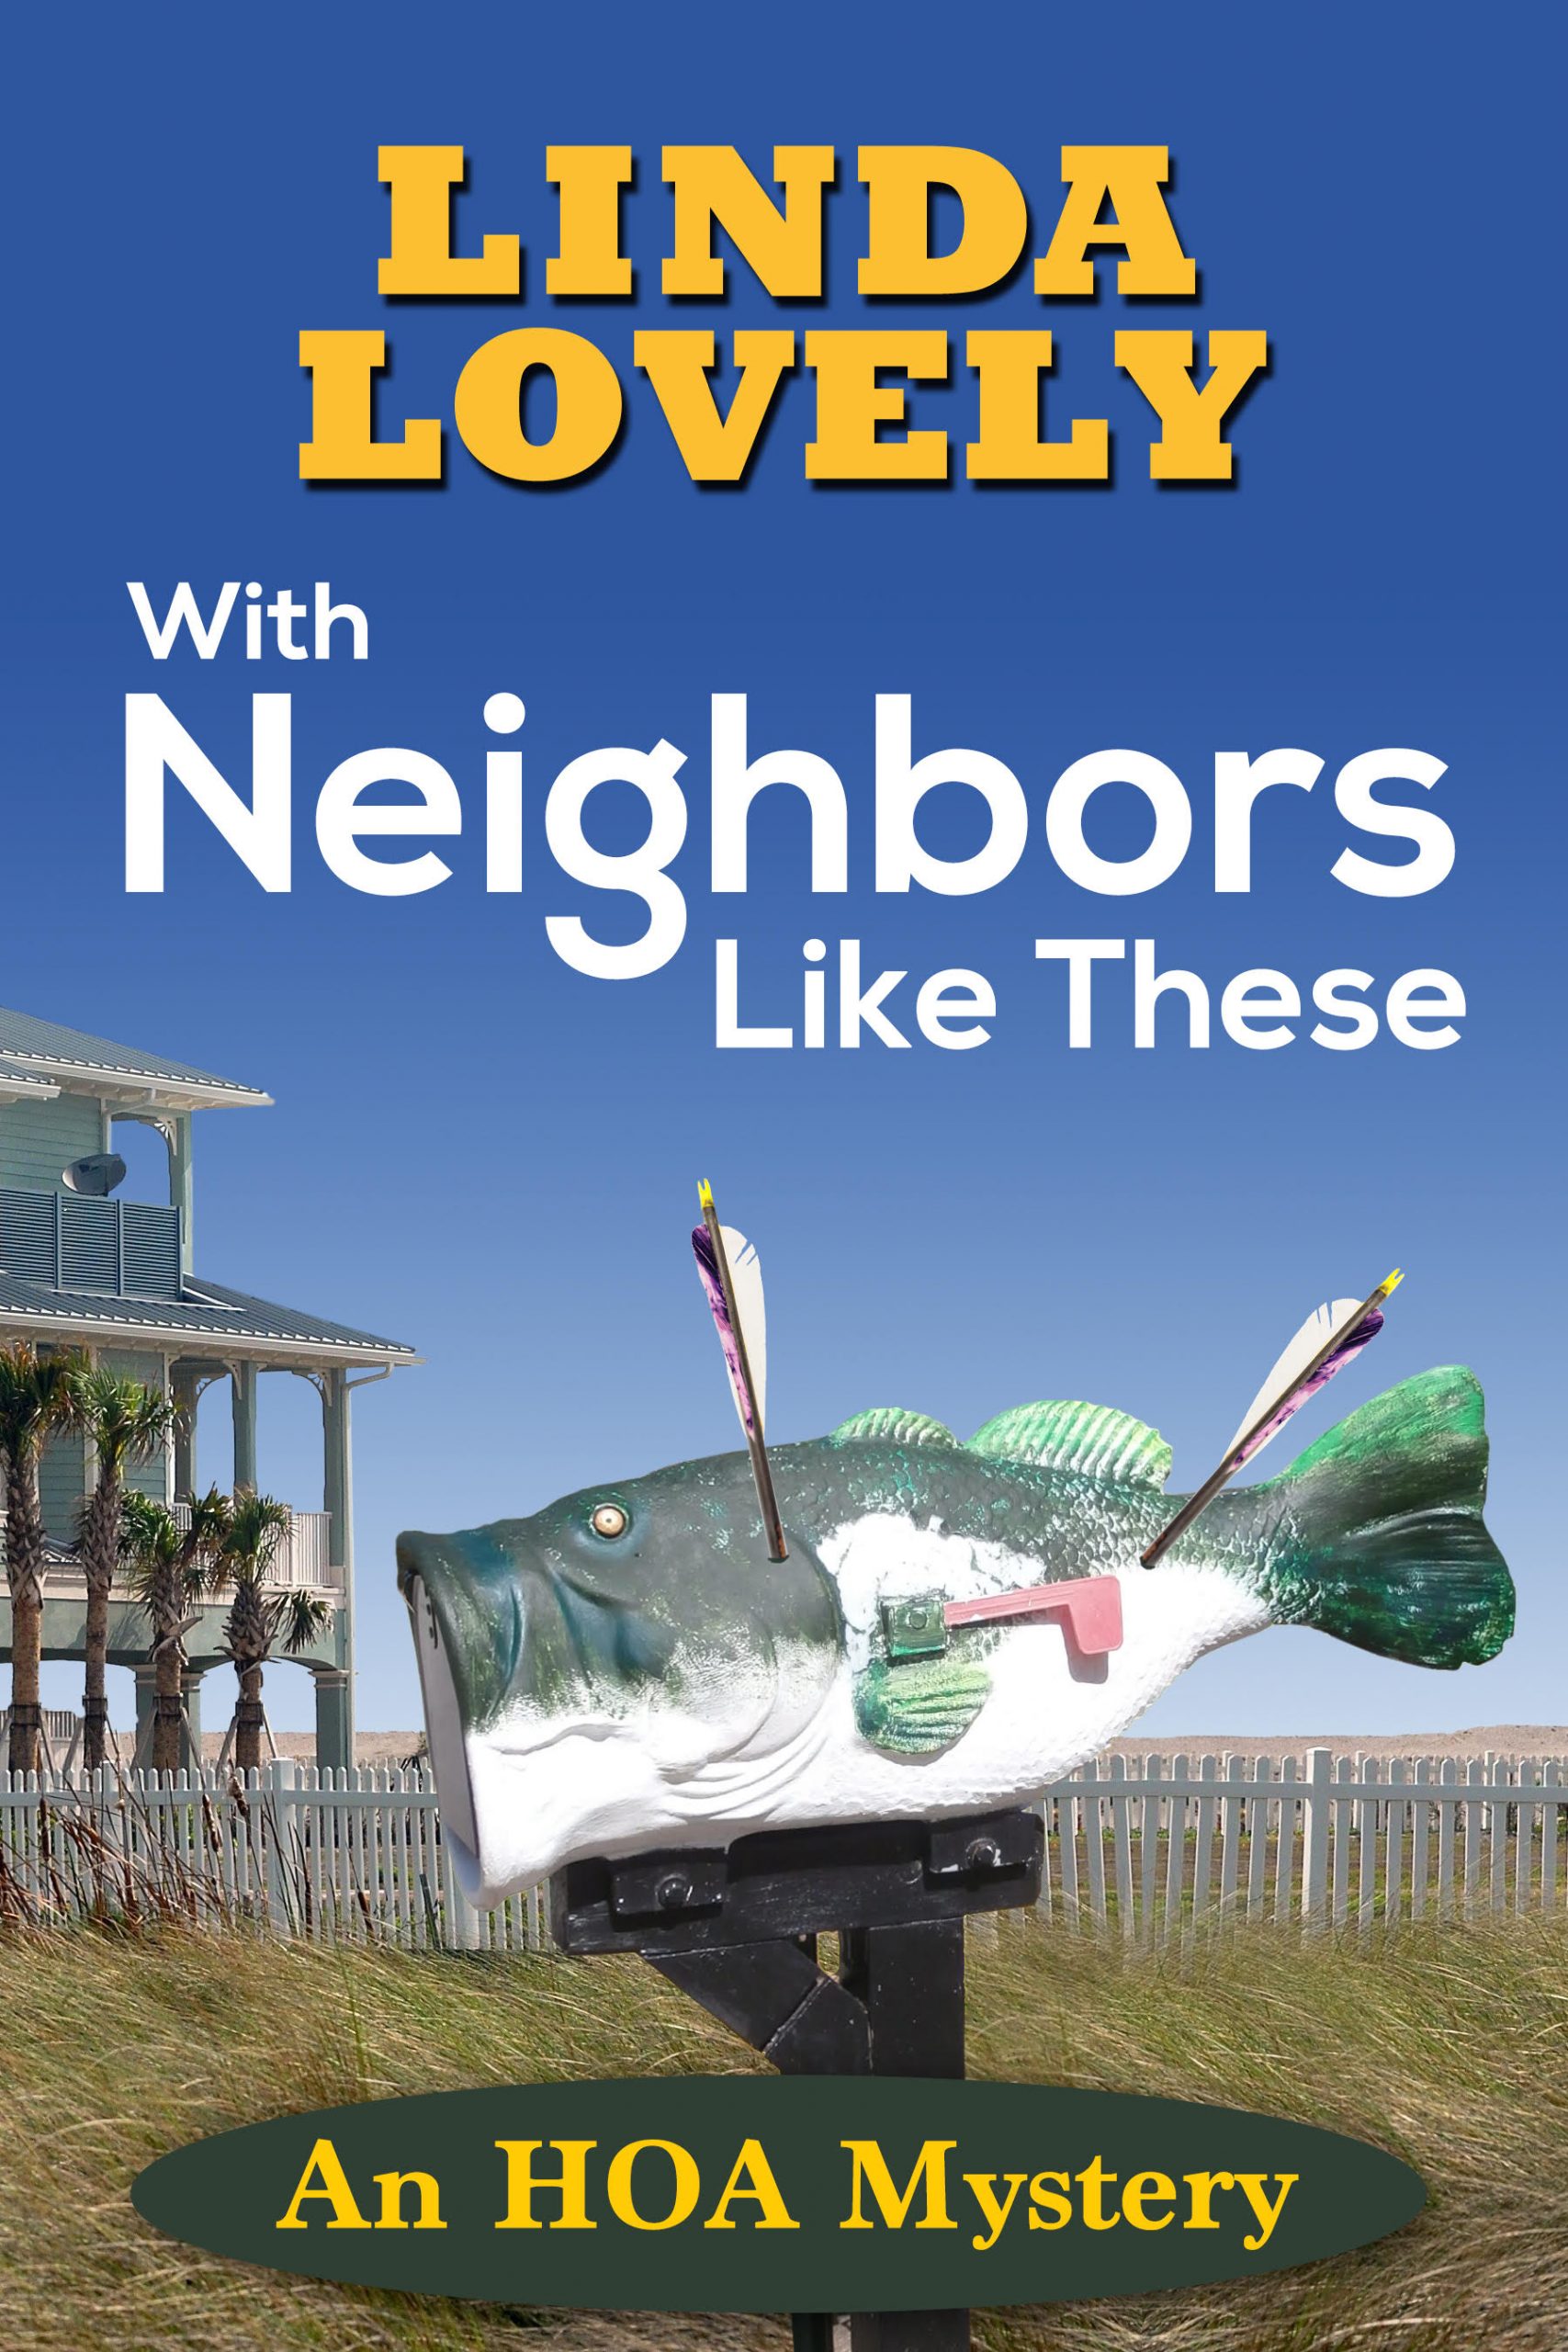 With Neighbors Like These by Linda Lovely